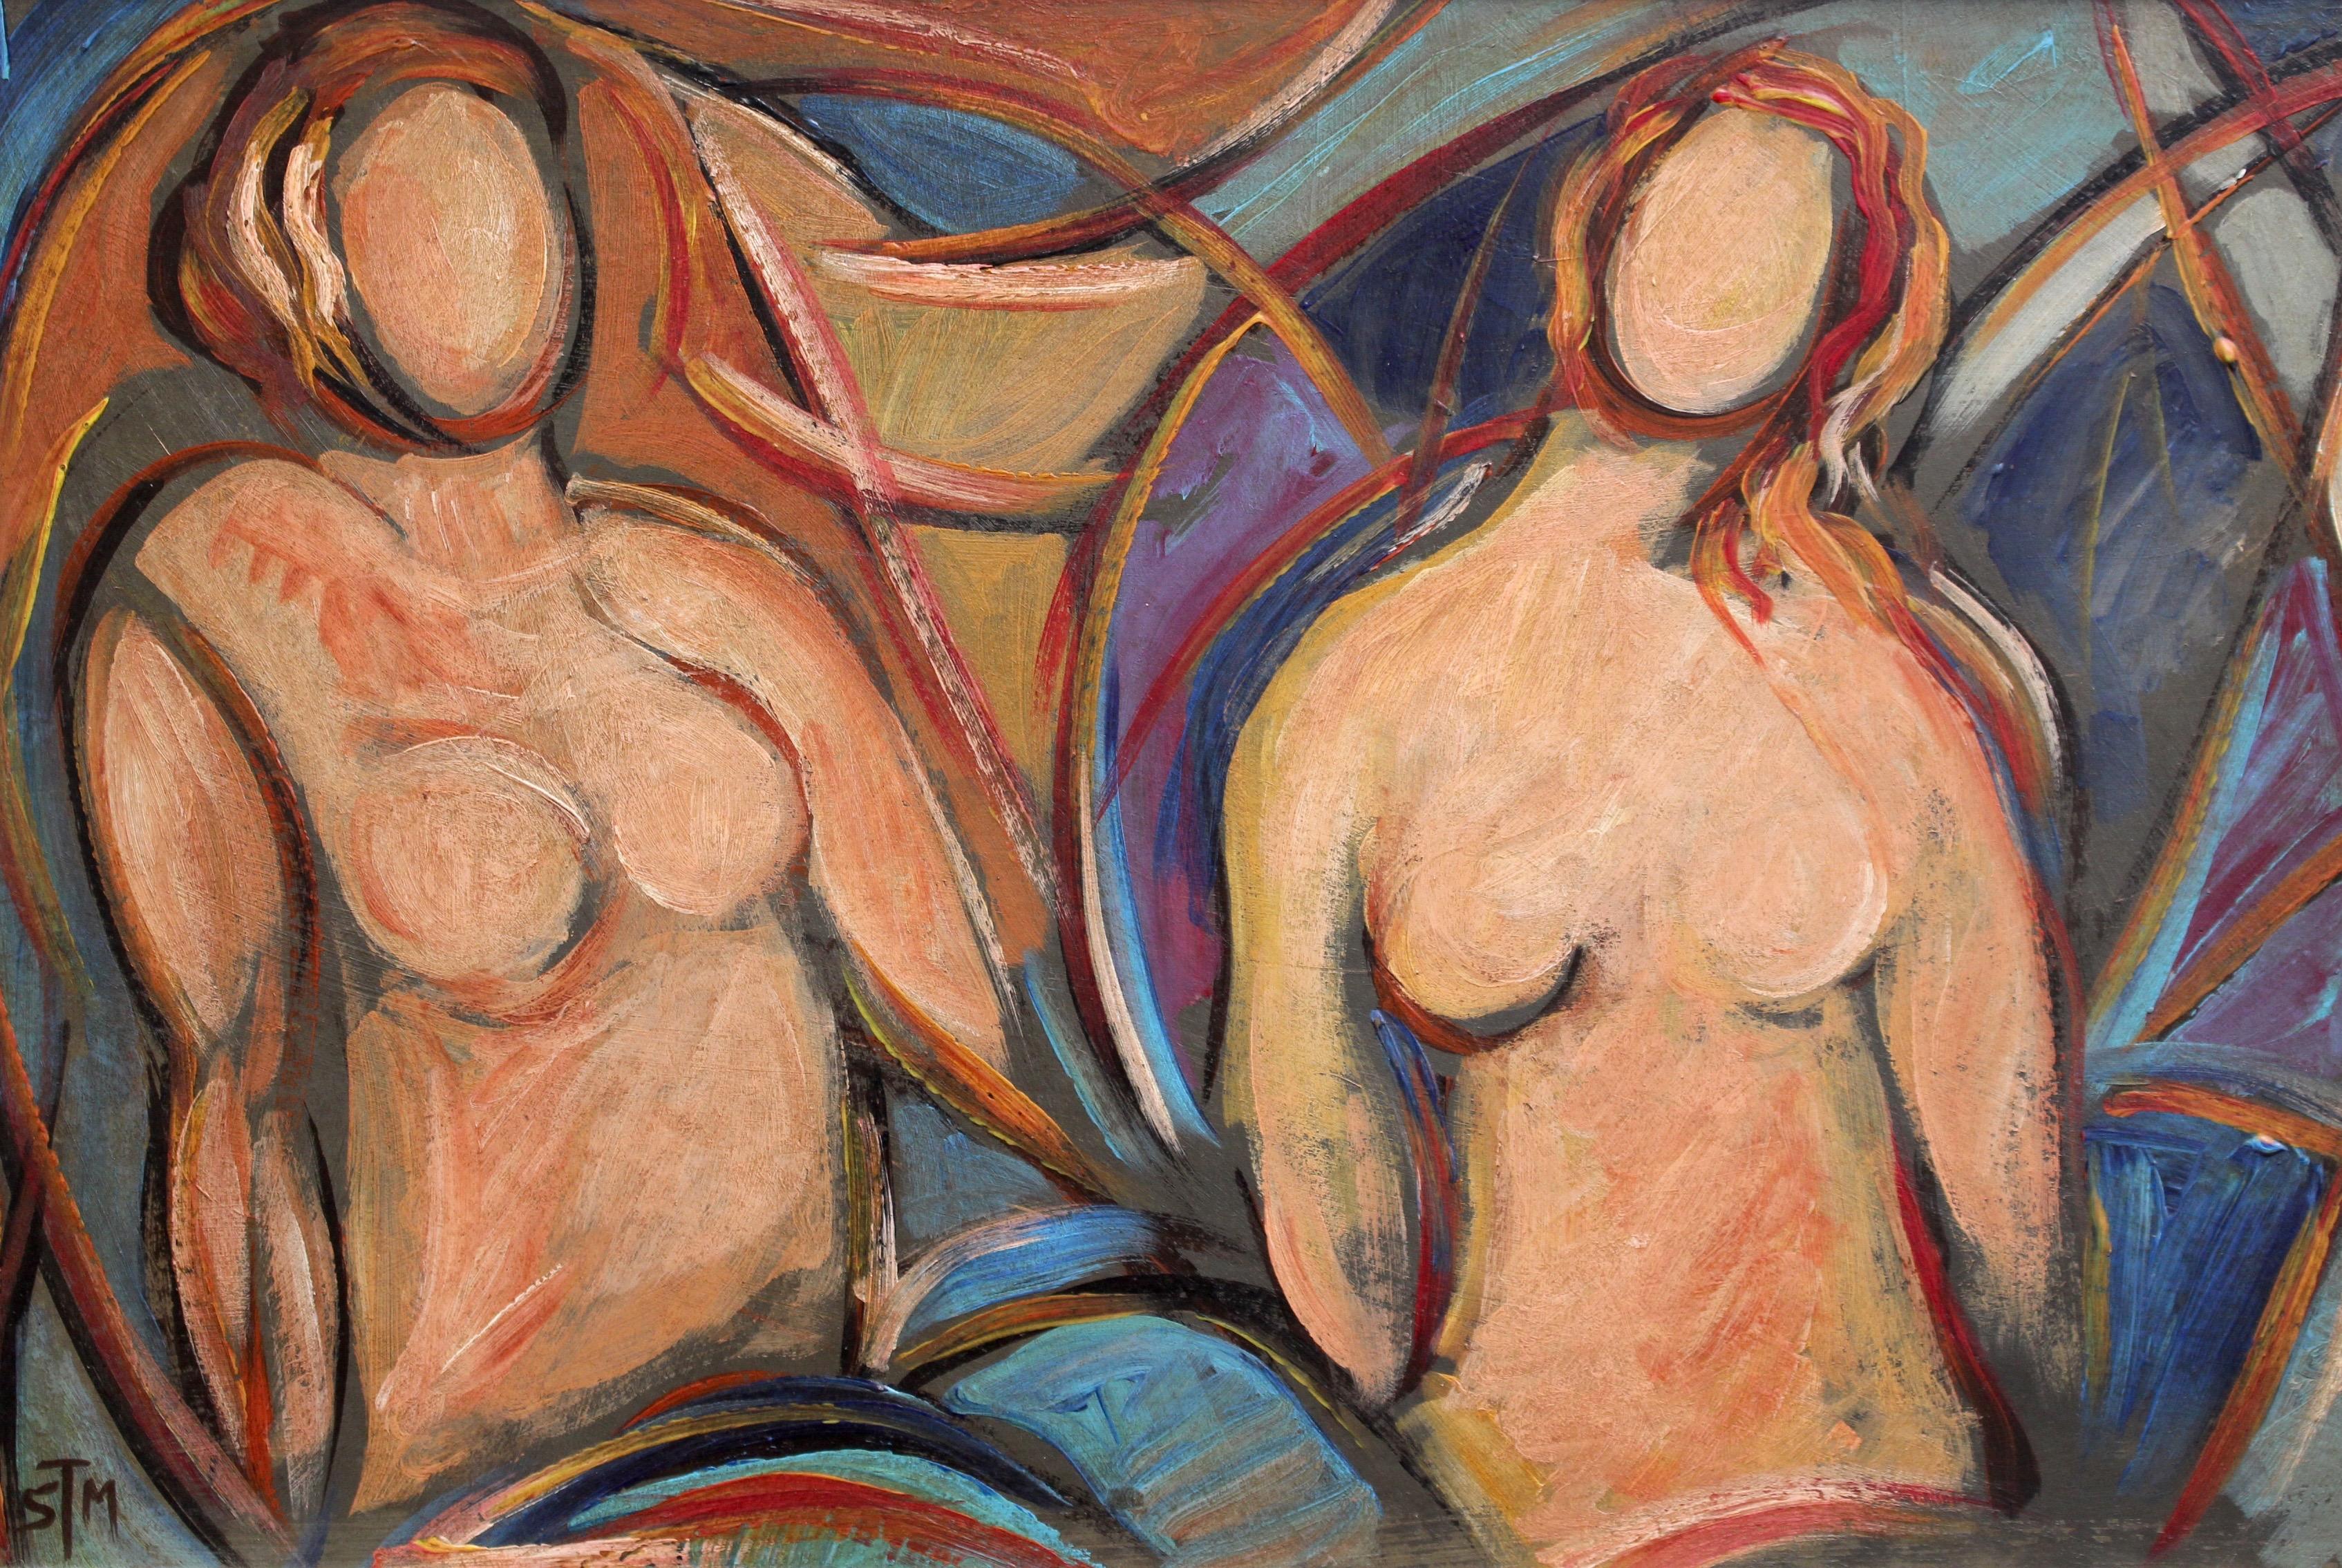 'Nudes in Repose' by STM, Mid-Century Modern Cubist Portrait Painting, Berlin 1